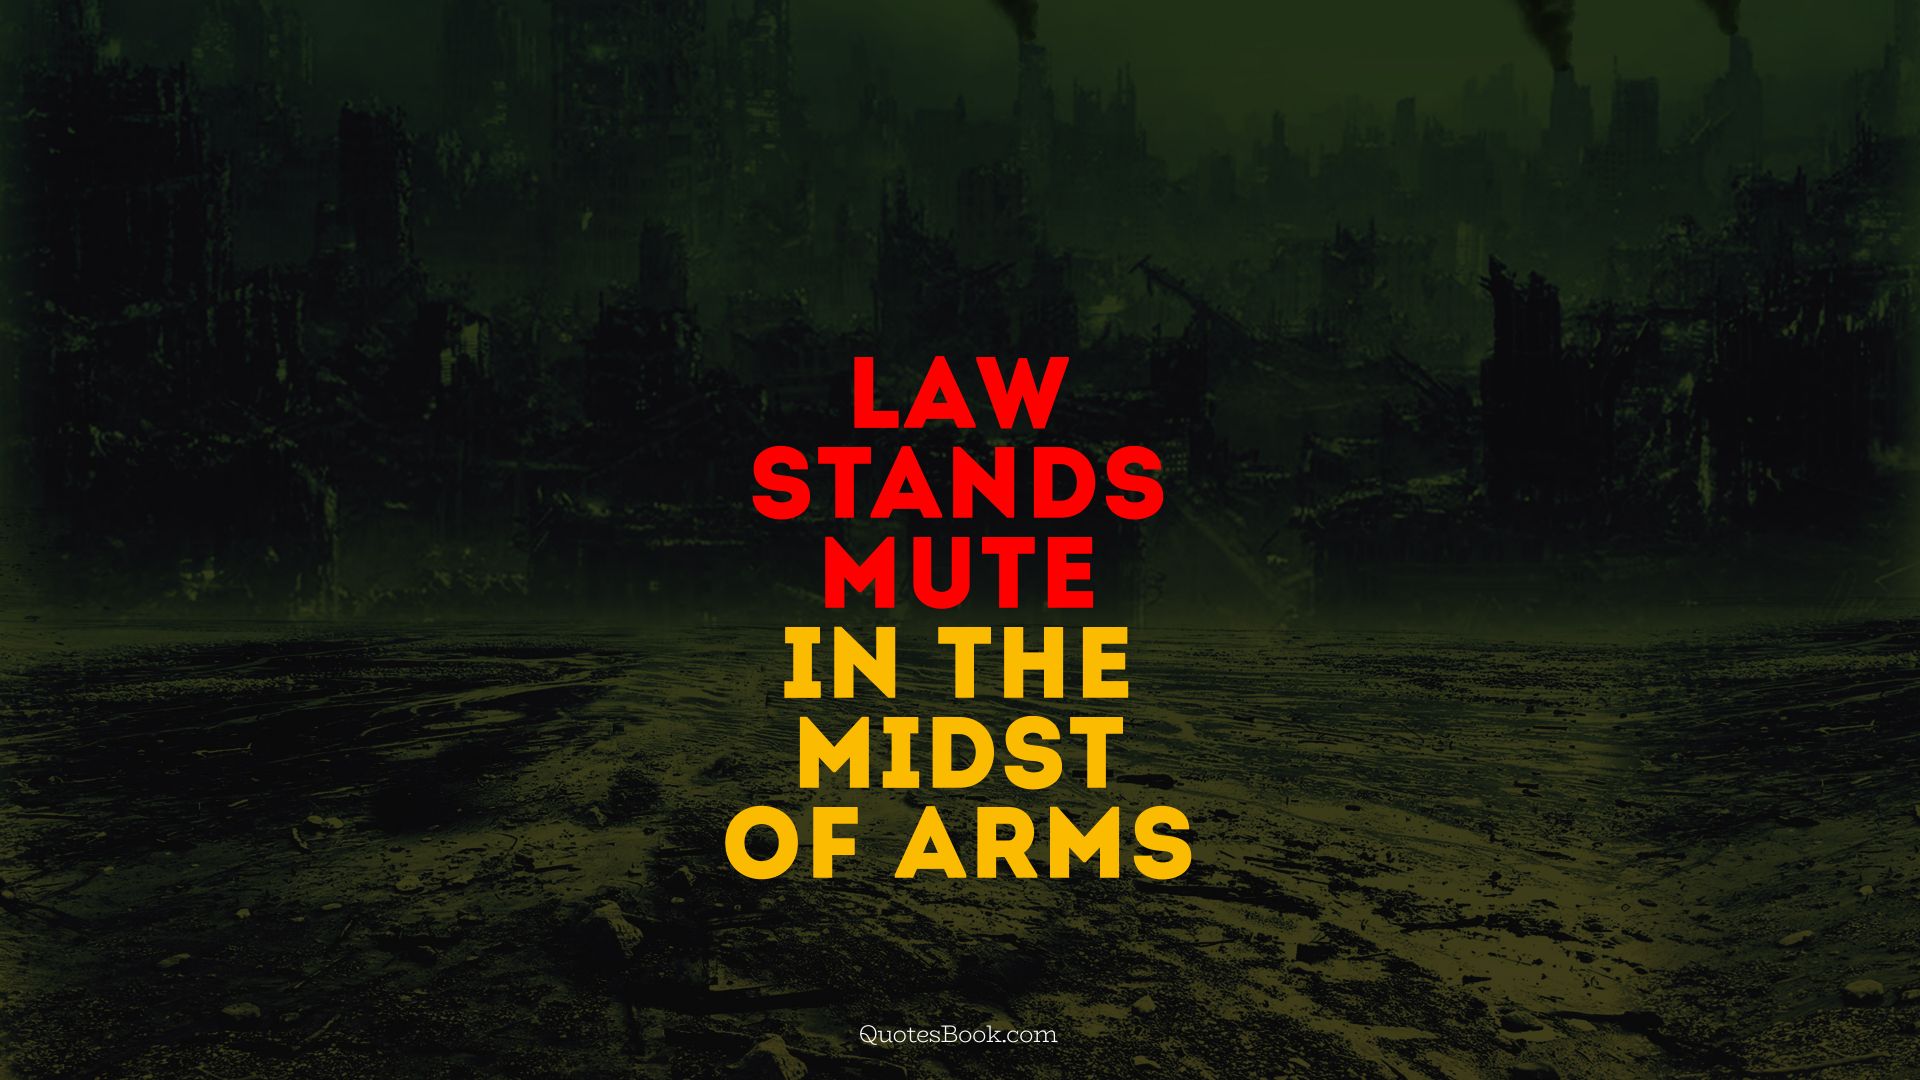 Law stands mute in the midst of arms